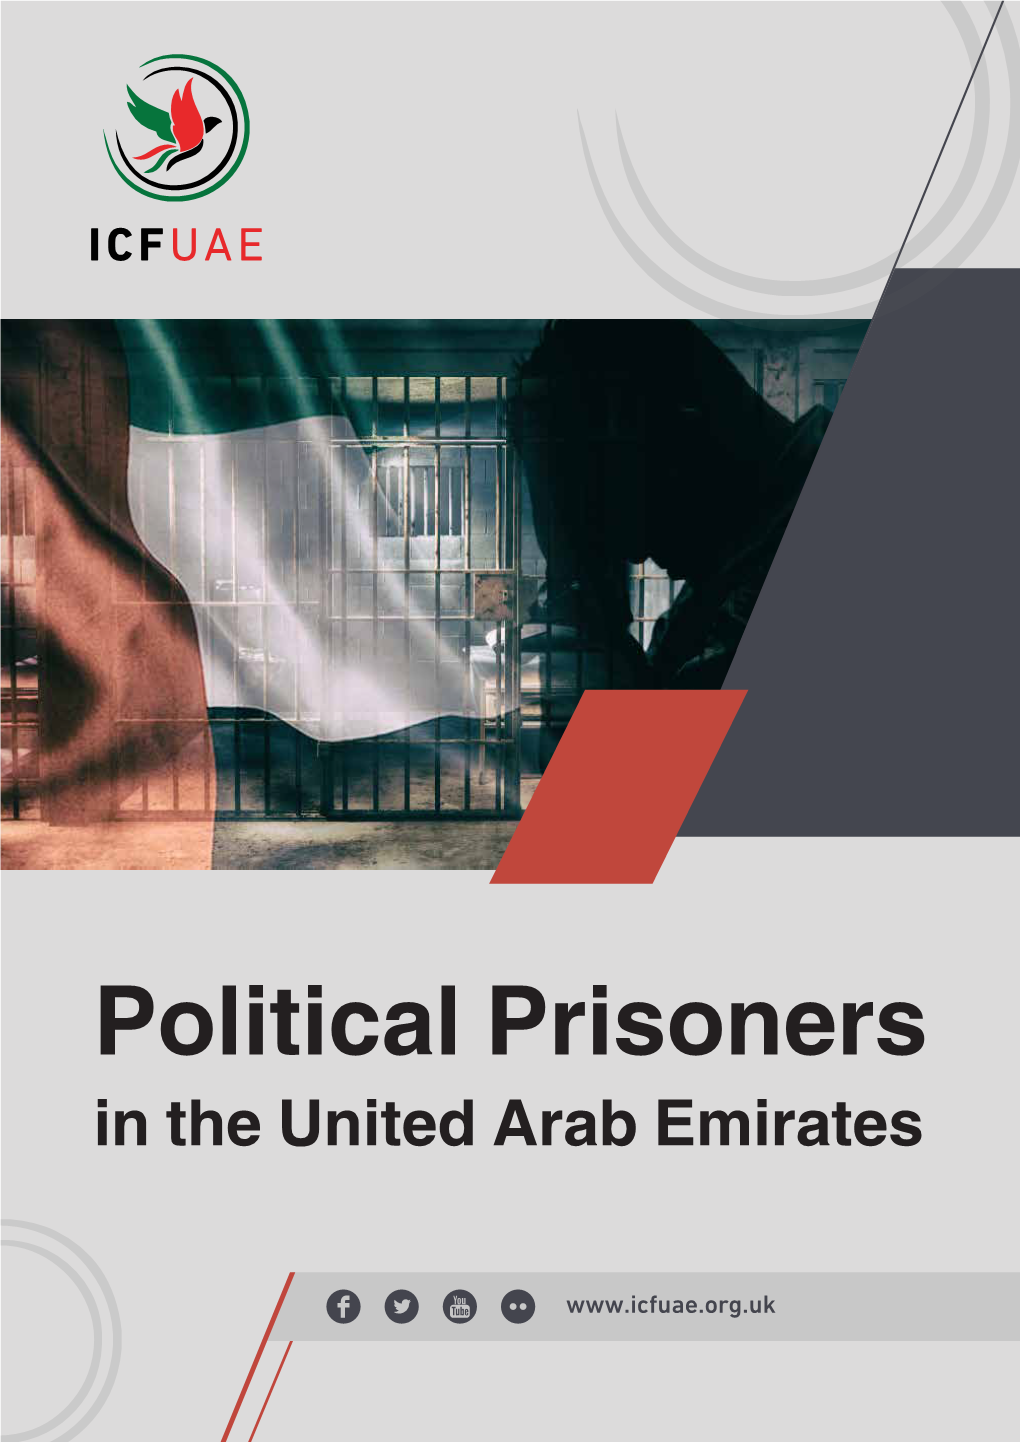 Political Prisoners in the United Arab Emirates Introduction